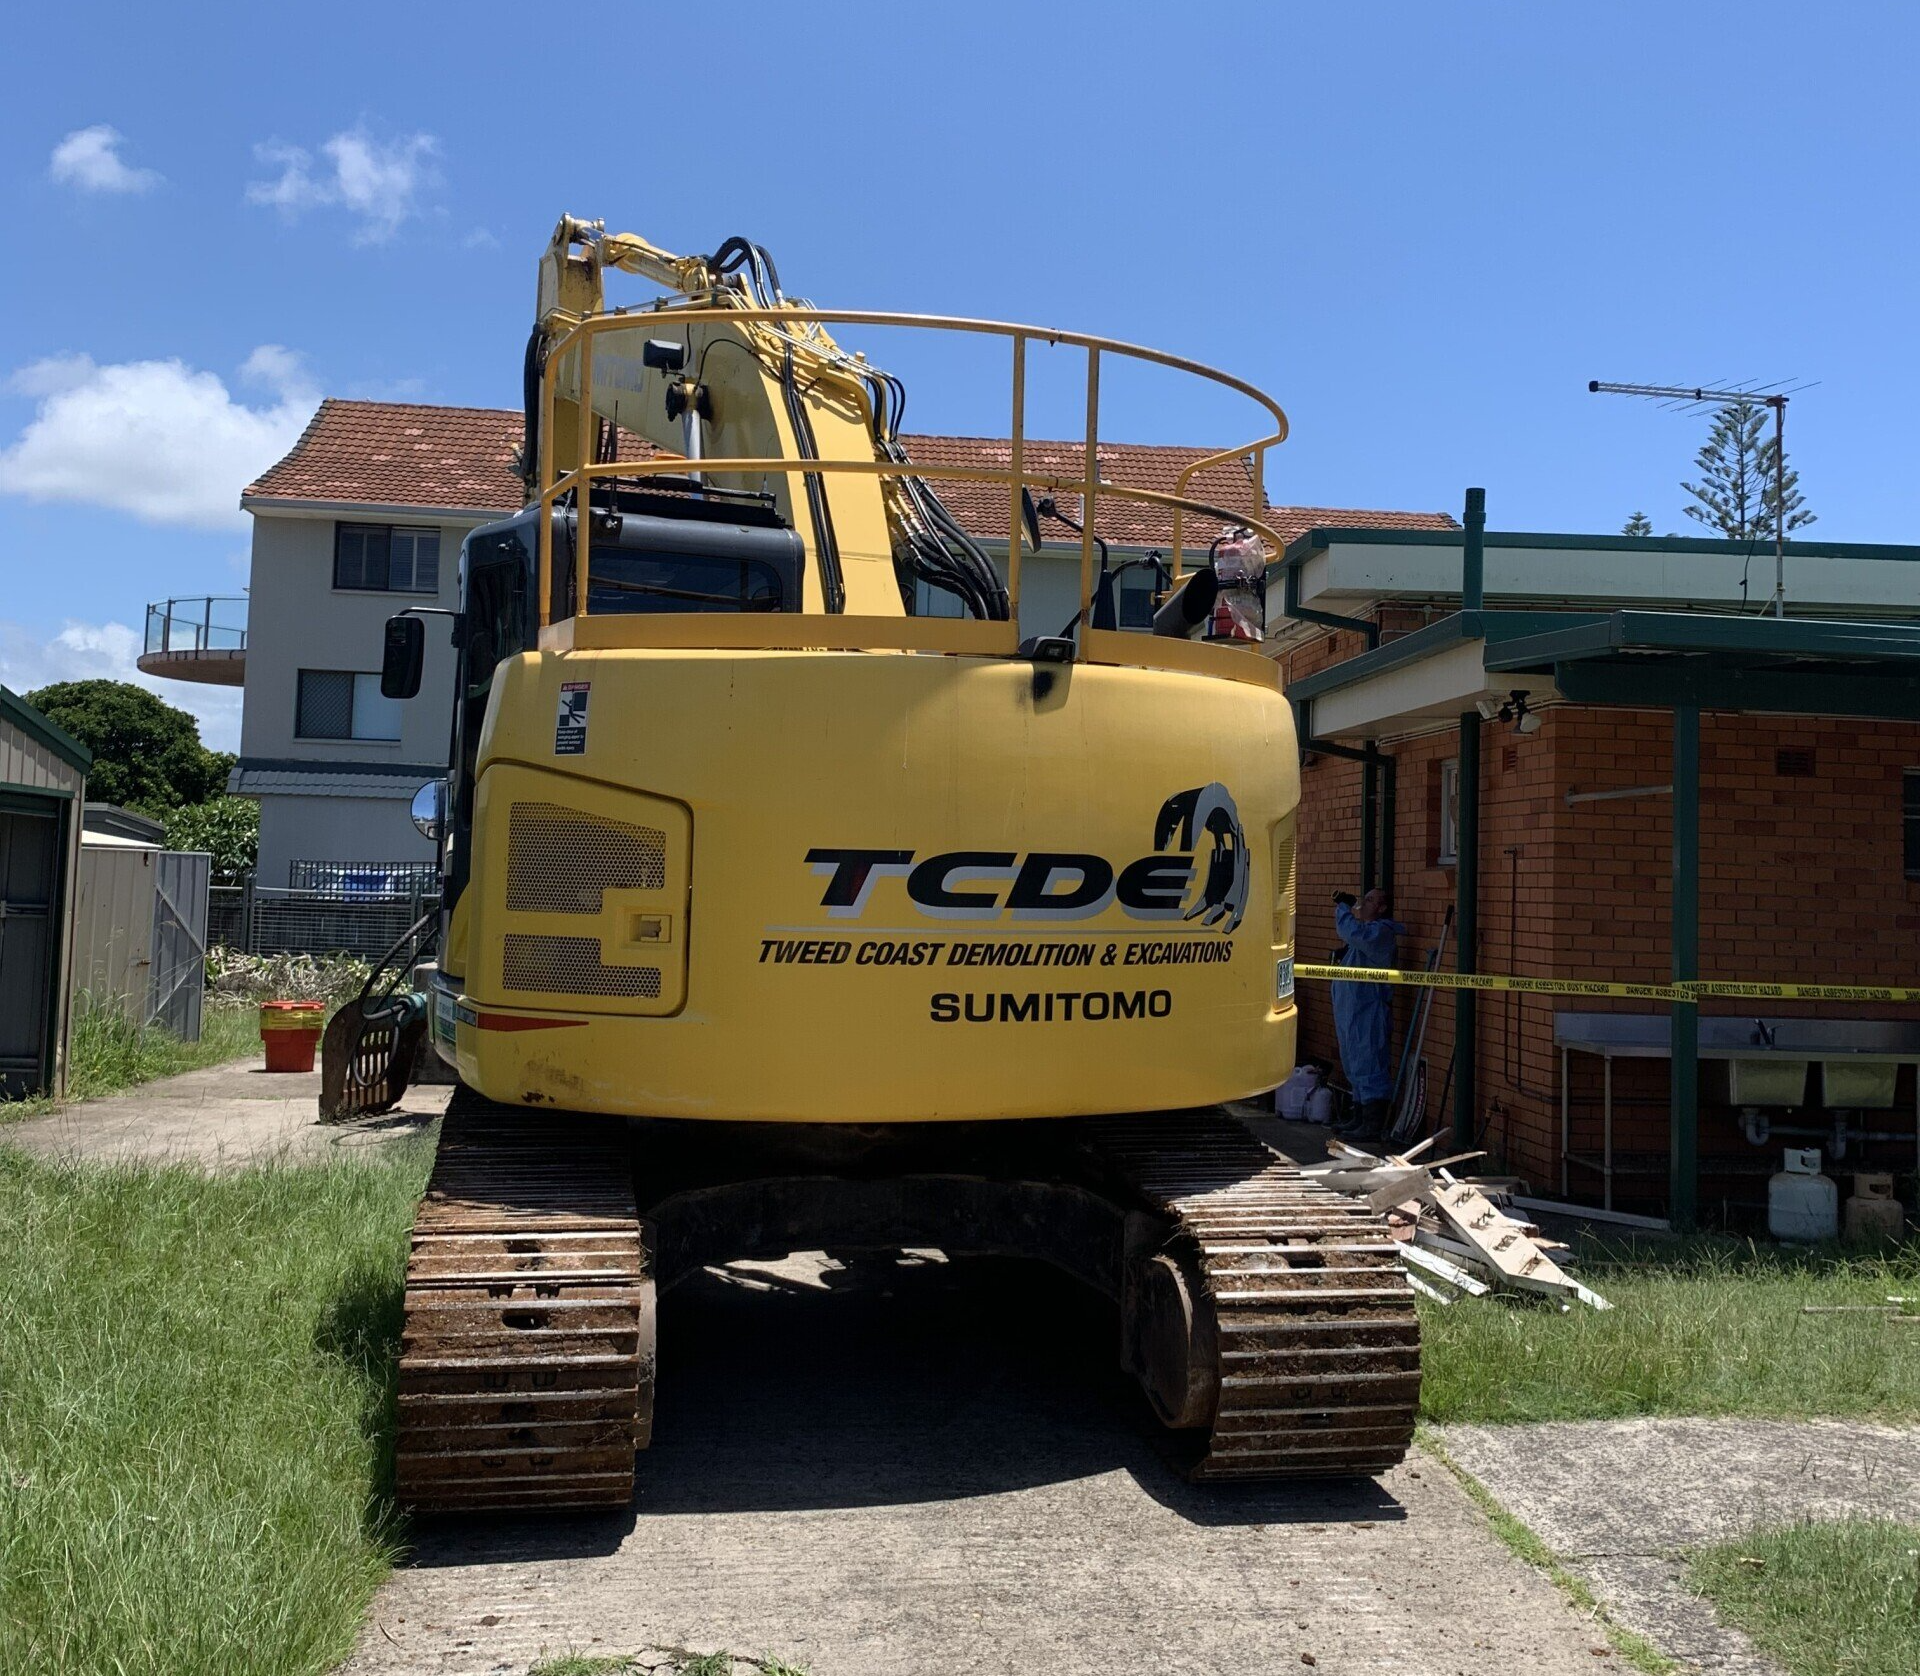 Excavator On A Demolition Site — Asbestos Removal And Demolition in Ballina, NSW